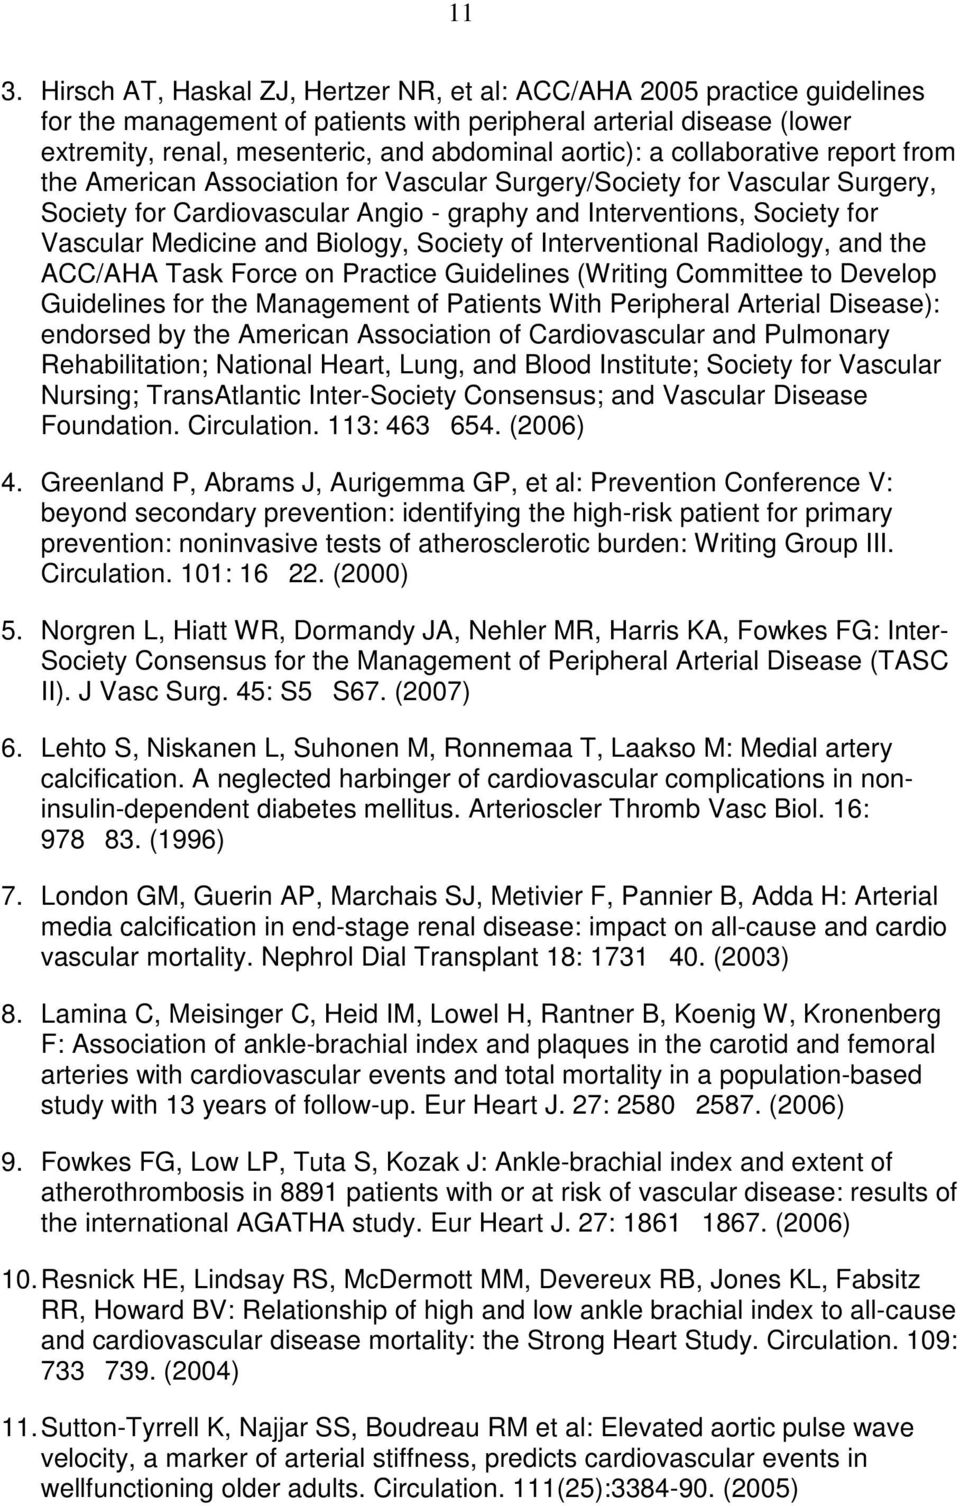 Medicine and Biology, Society of Interventional Radiology, and the ACC/AHA Task Force on Practice Guidelines (Writing Committee to Develop Guidelines for the Management of Patients With Peripheral